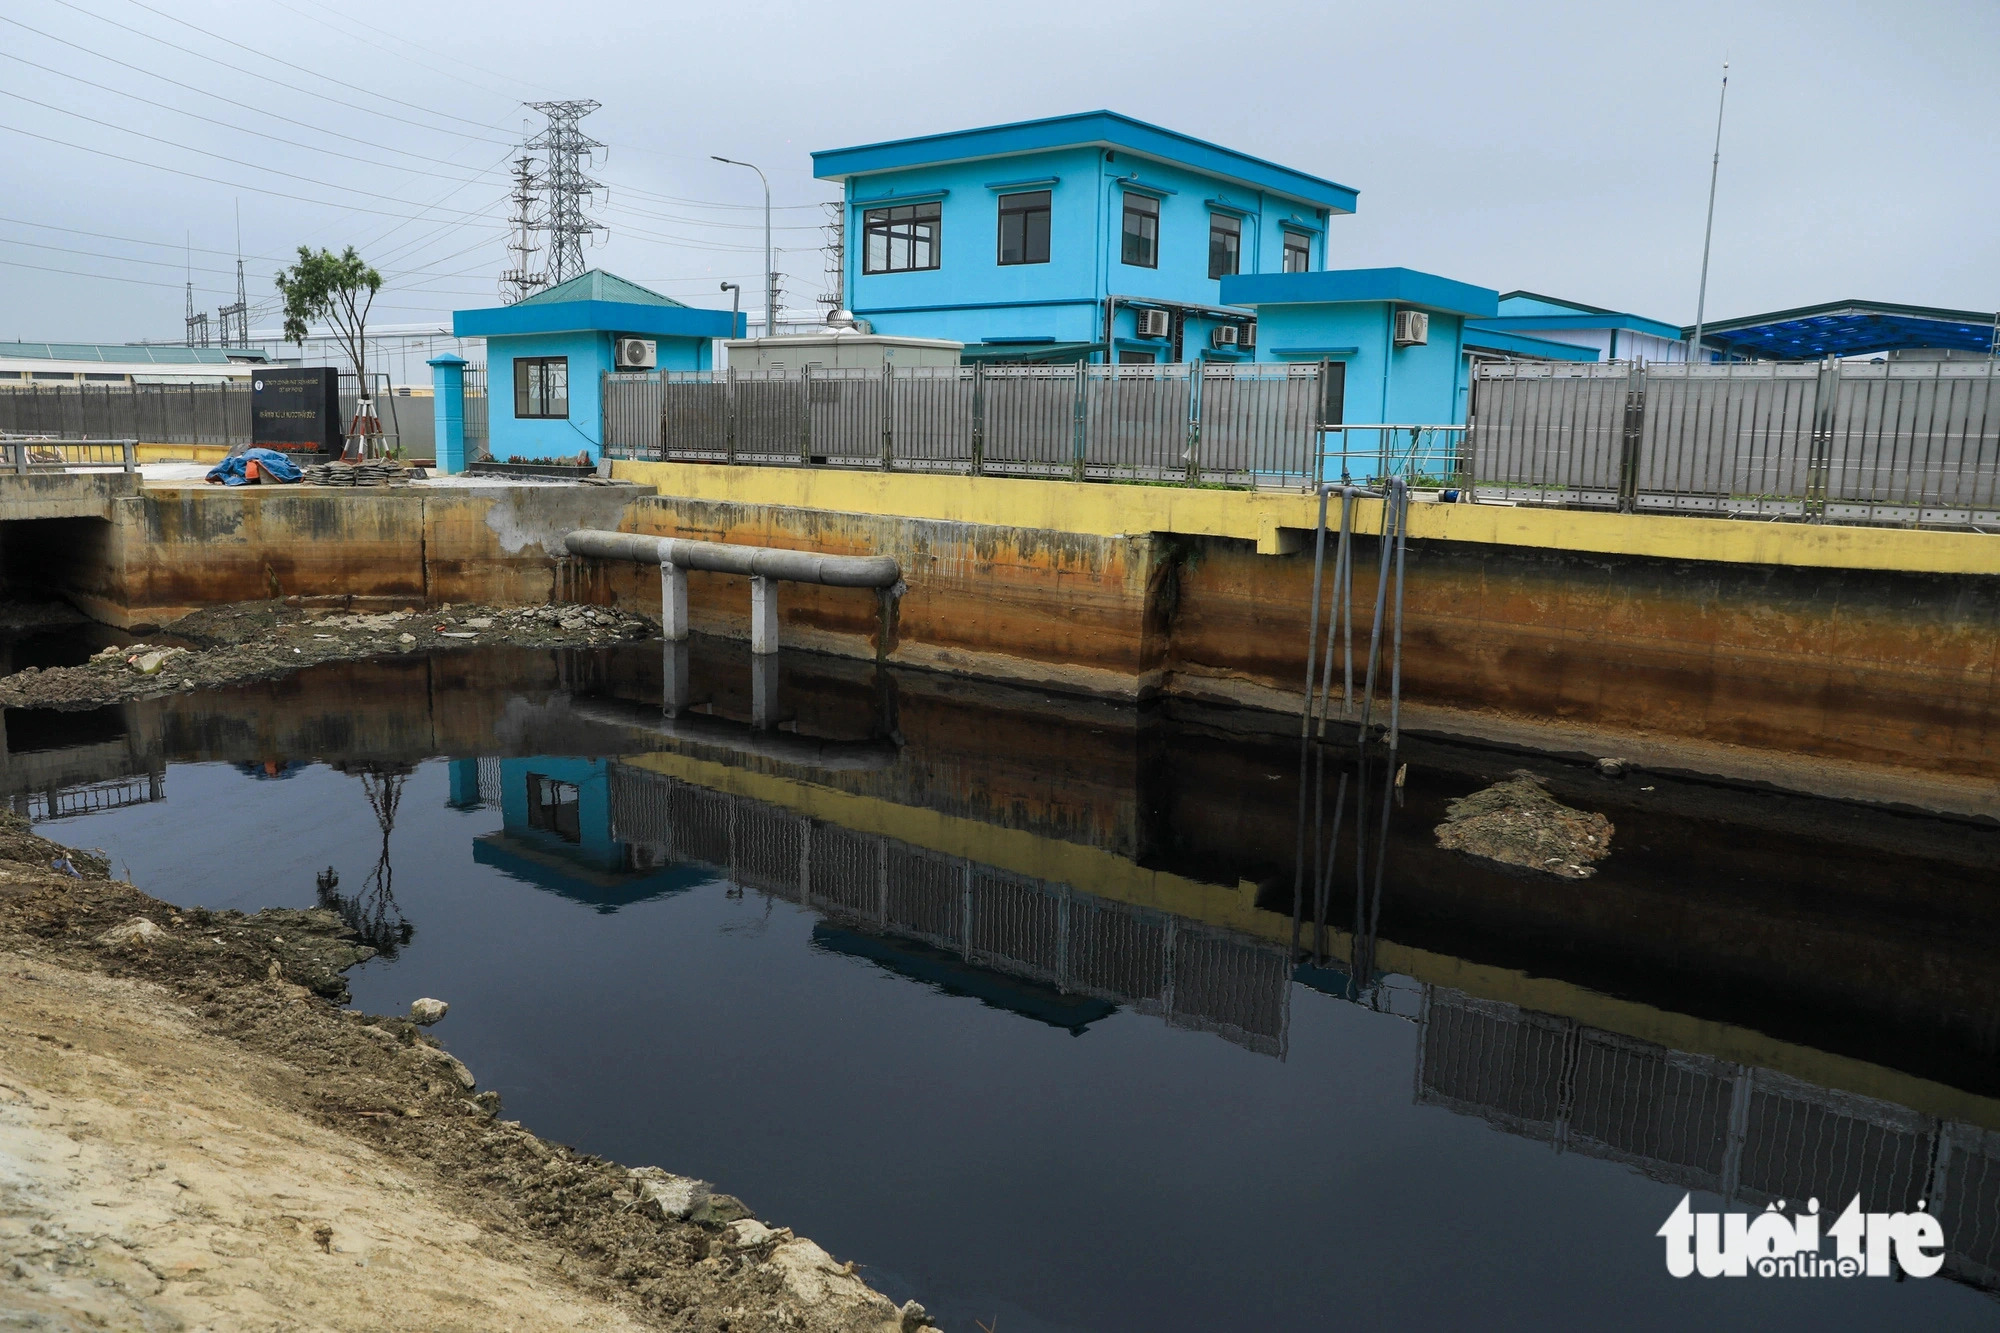 A rainwater storage reservoir inside the the Pho Noi B textile industrial park in My Hao Town, Hung Yen Province, northern Vietnam also has an awful odor. Photo: Tuoi Tre